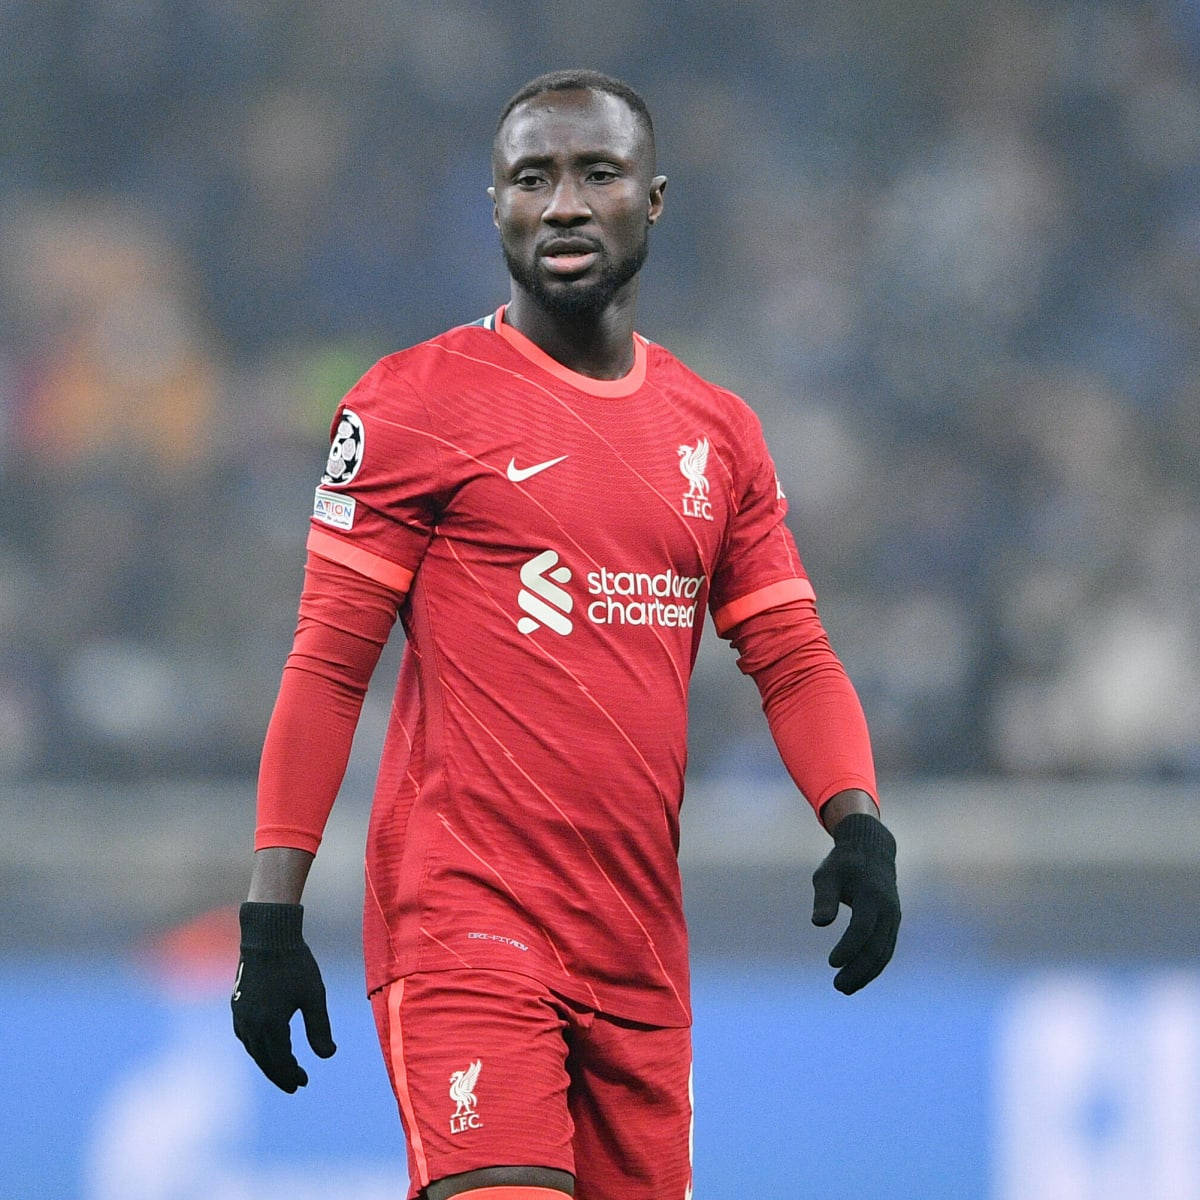 Nabykeita Mitt I Spelet (for A Computer Or Mobile Wallpaper Featuring Naby Keita During A Game) Wallpaper